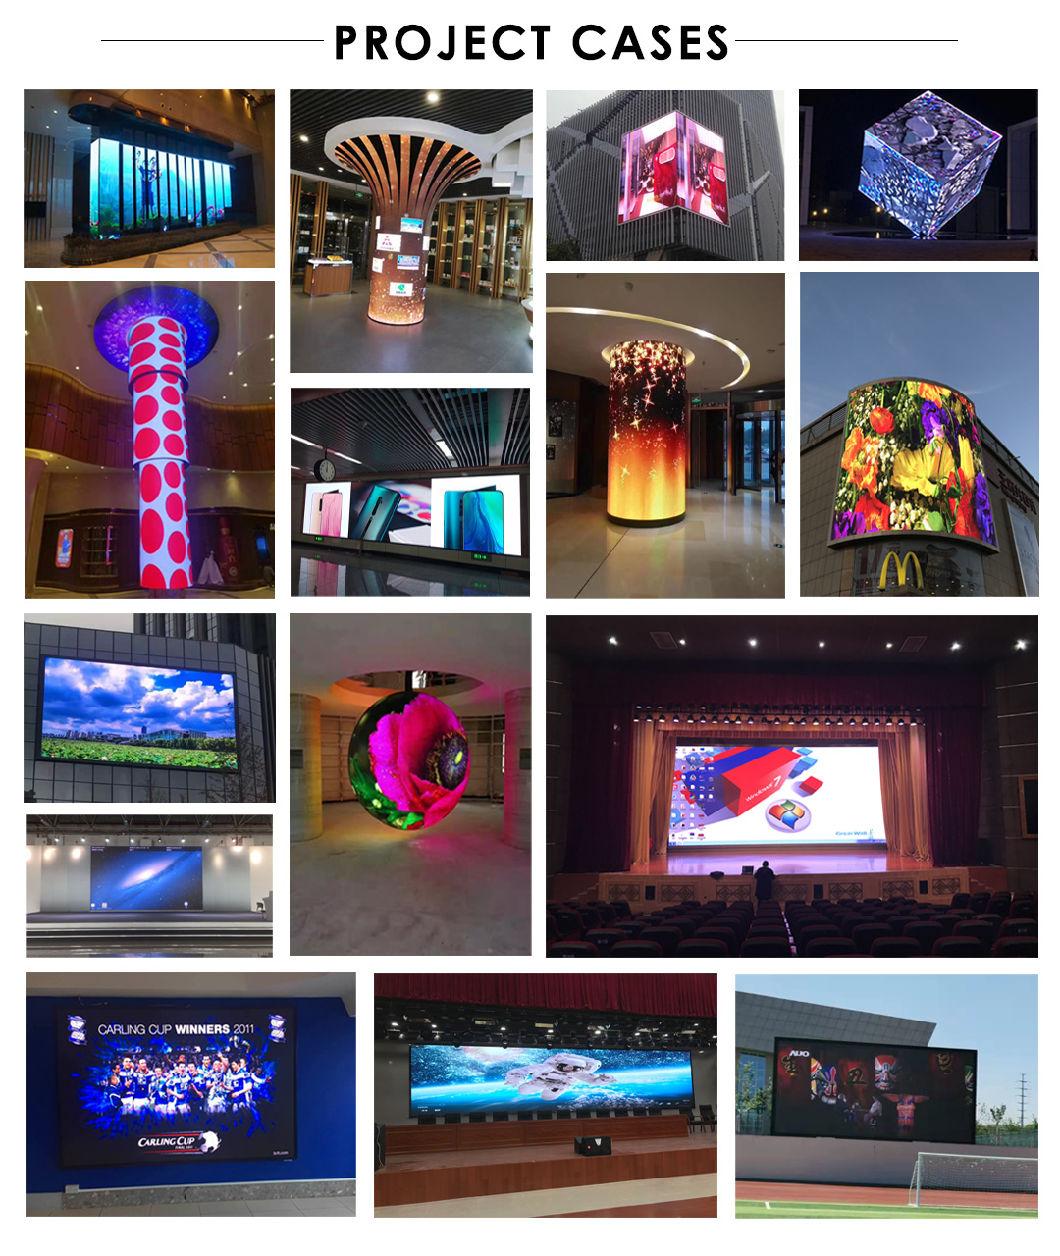 Small Pixel Pitch 1.538mm Clear and Smoother LED Display Screen Indoor Full Color LED Display video